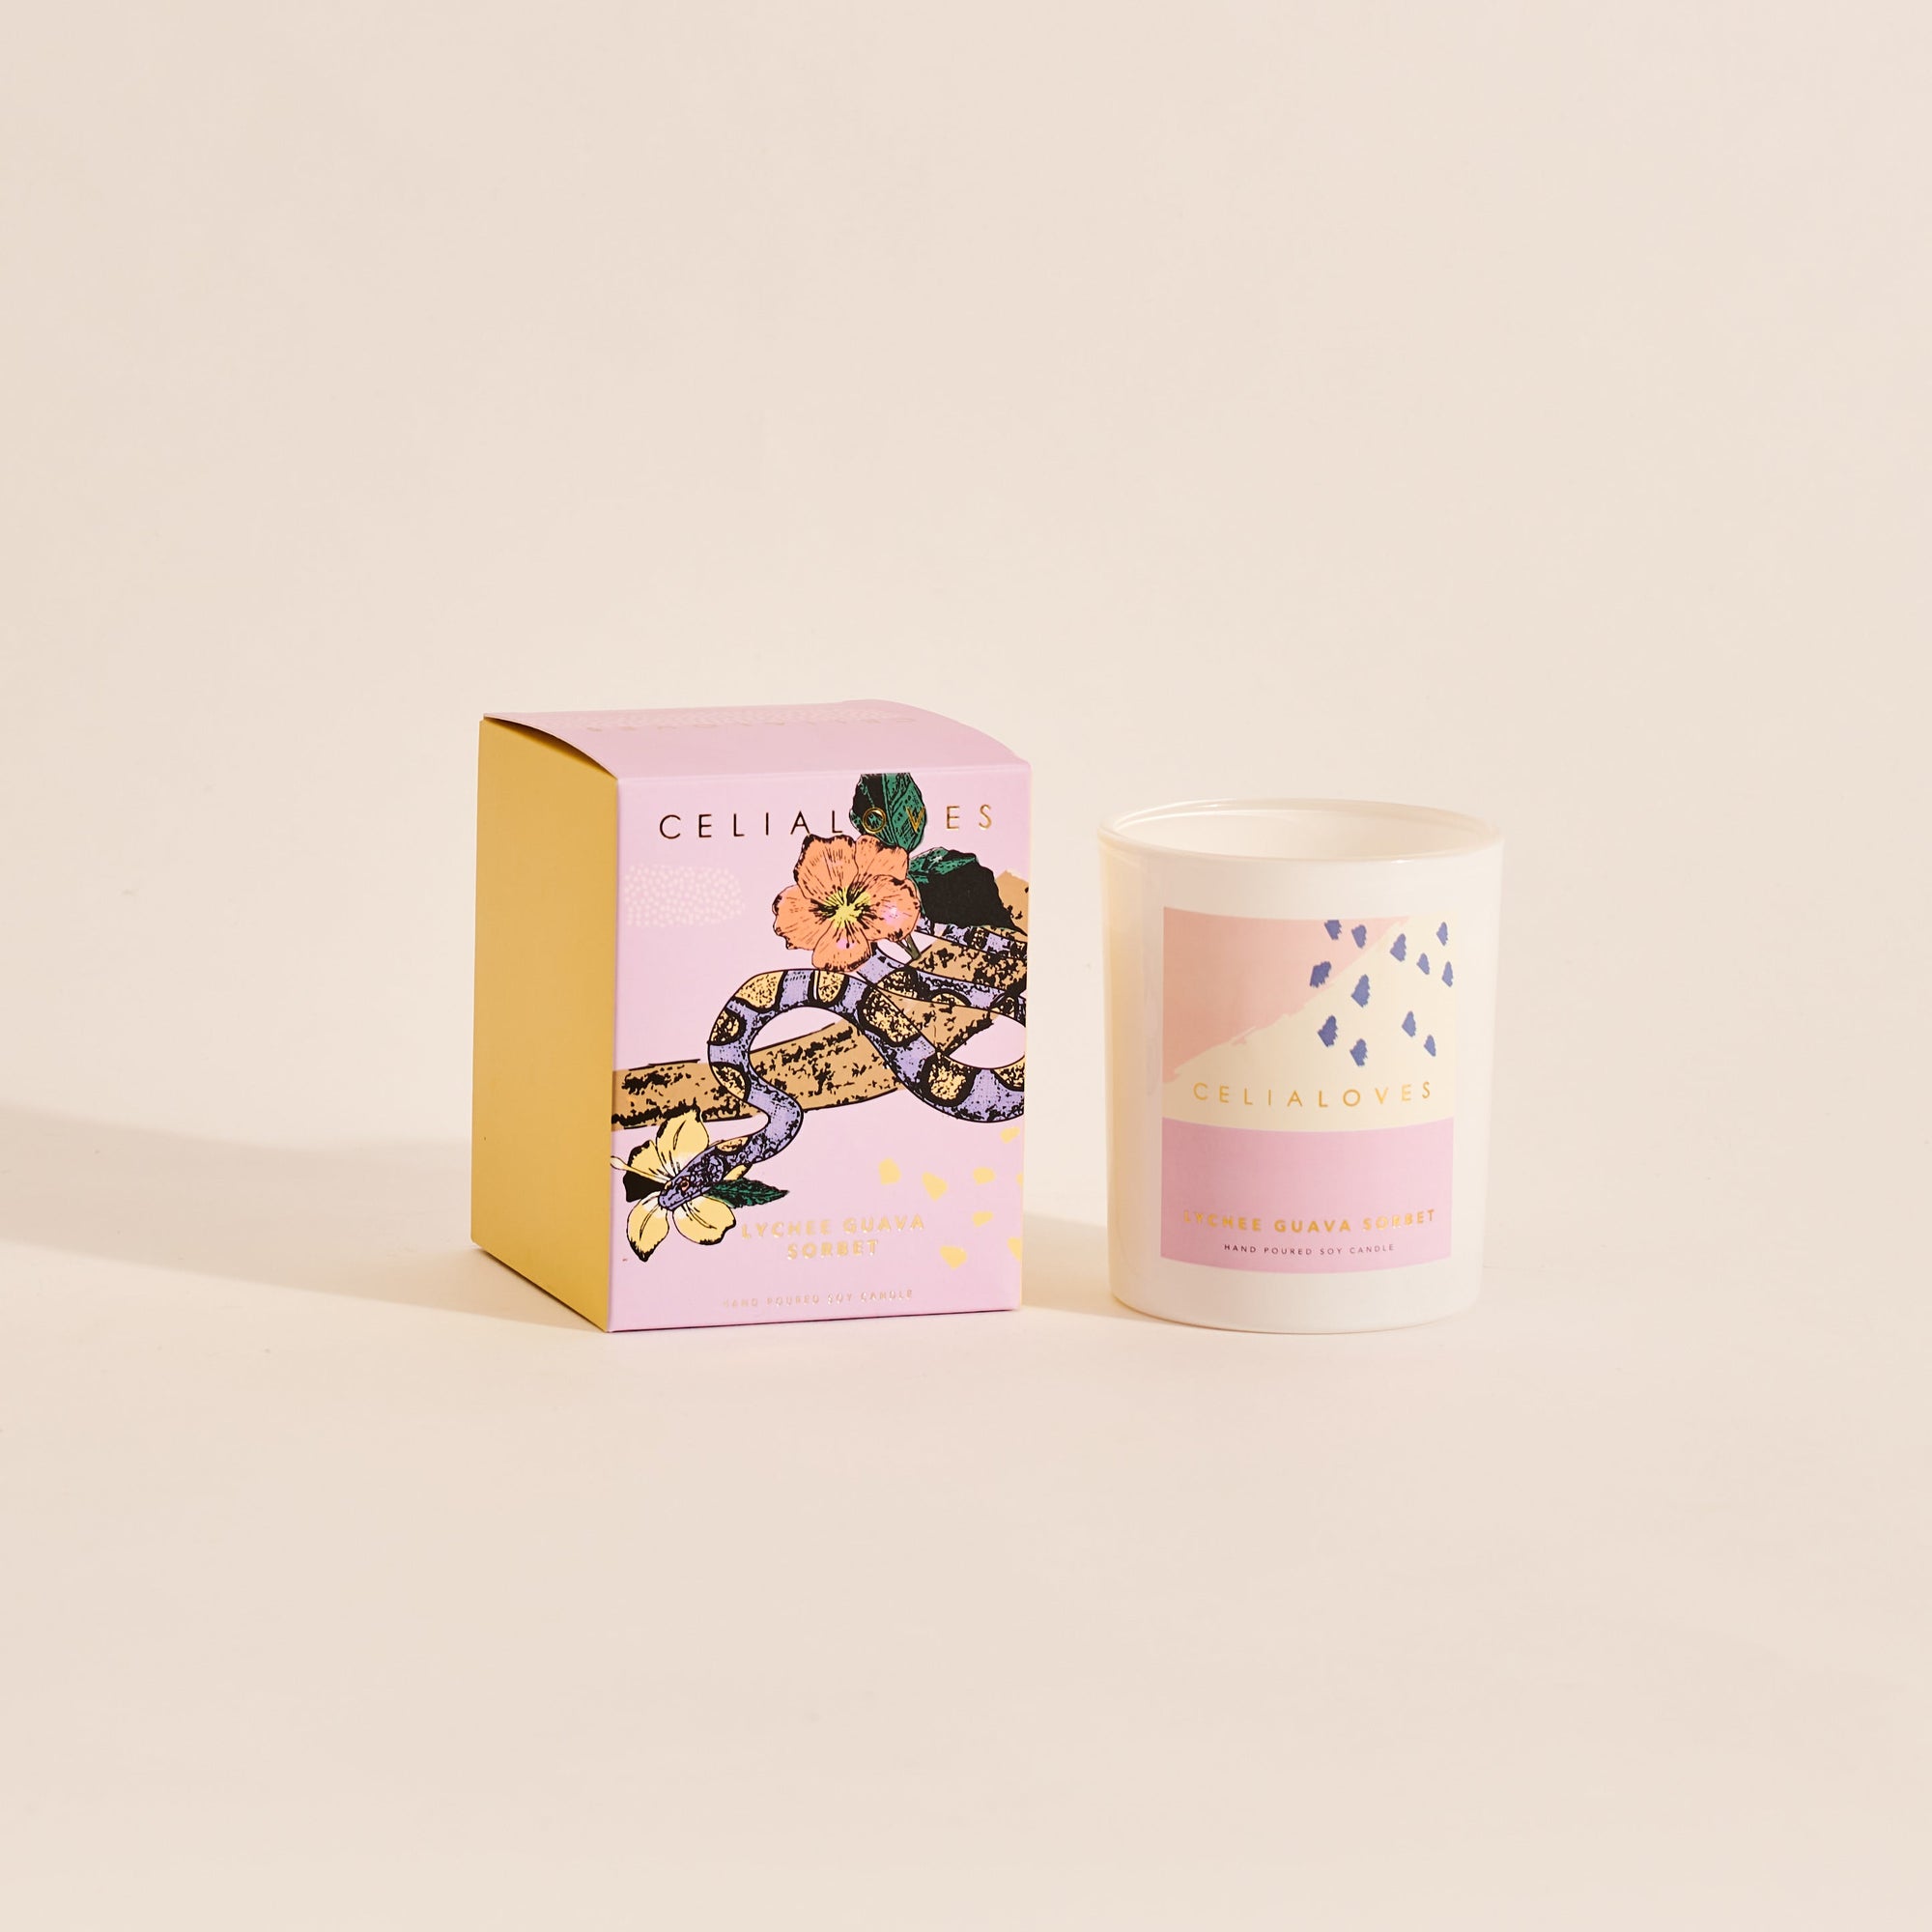 Lychee Guava Sorbet Candle